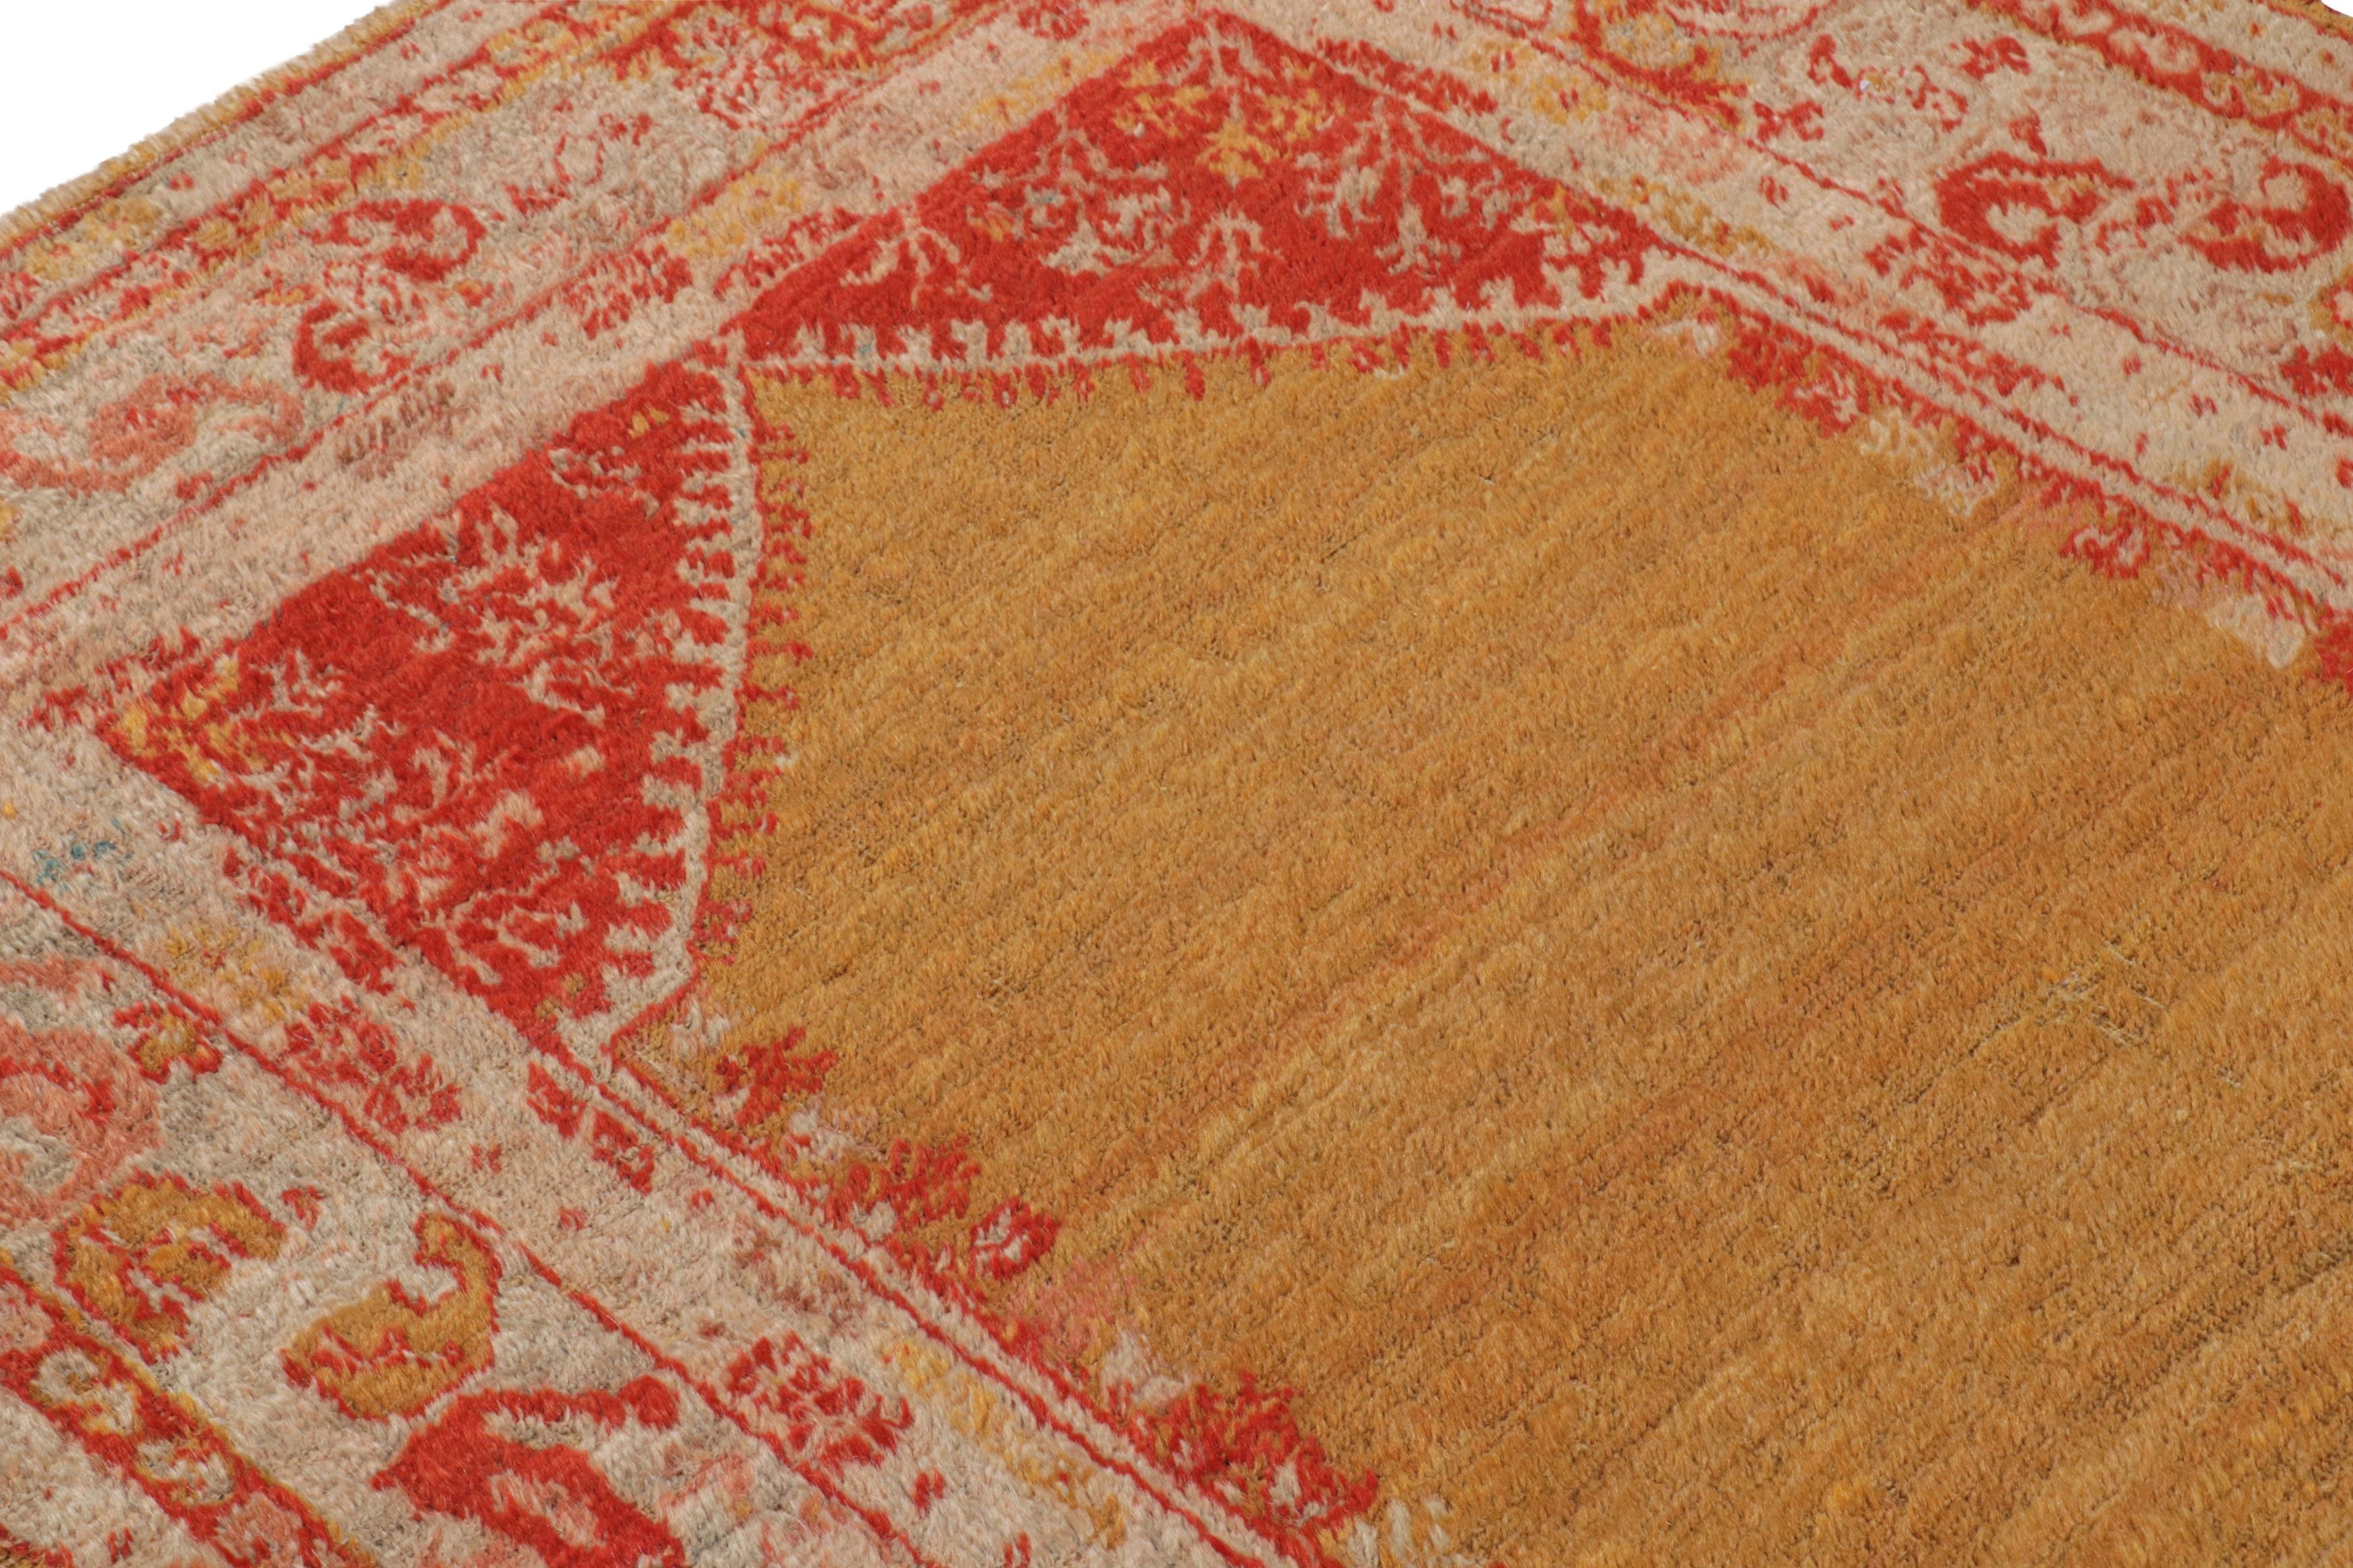 Originating from Turkey in 1890, this antique Oushak rug is hand knotted with particularly plush, sleak angora wool, lending it a silk-like sheen complemented by the ornate combination of vermillion red and sunset gold colourways; further accented